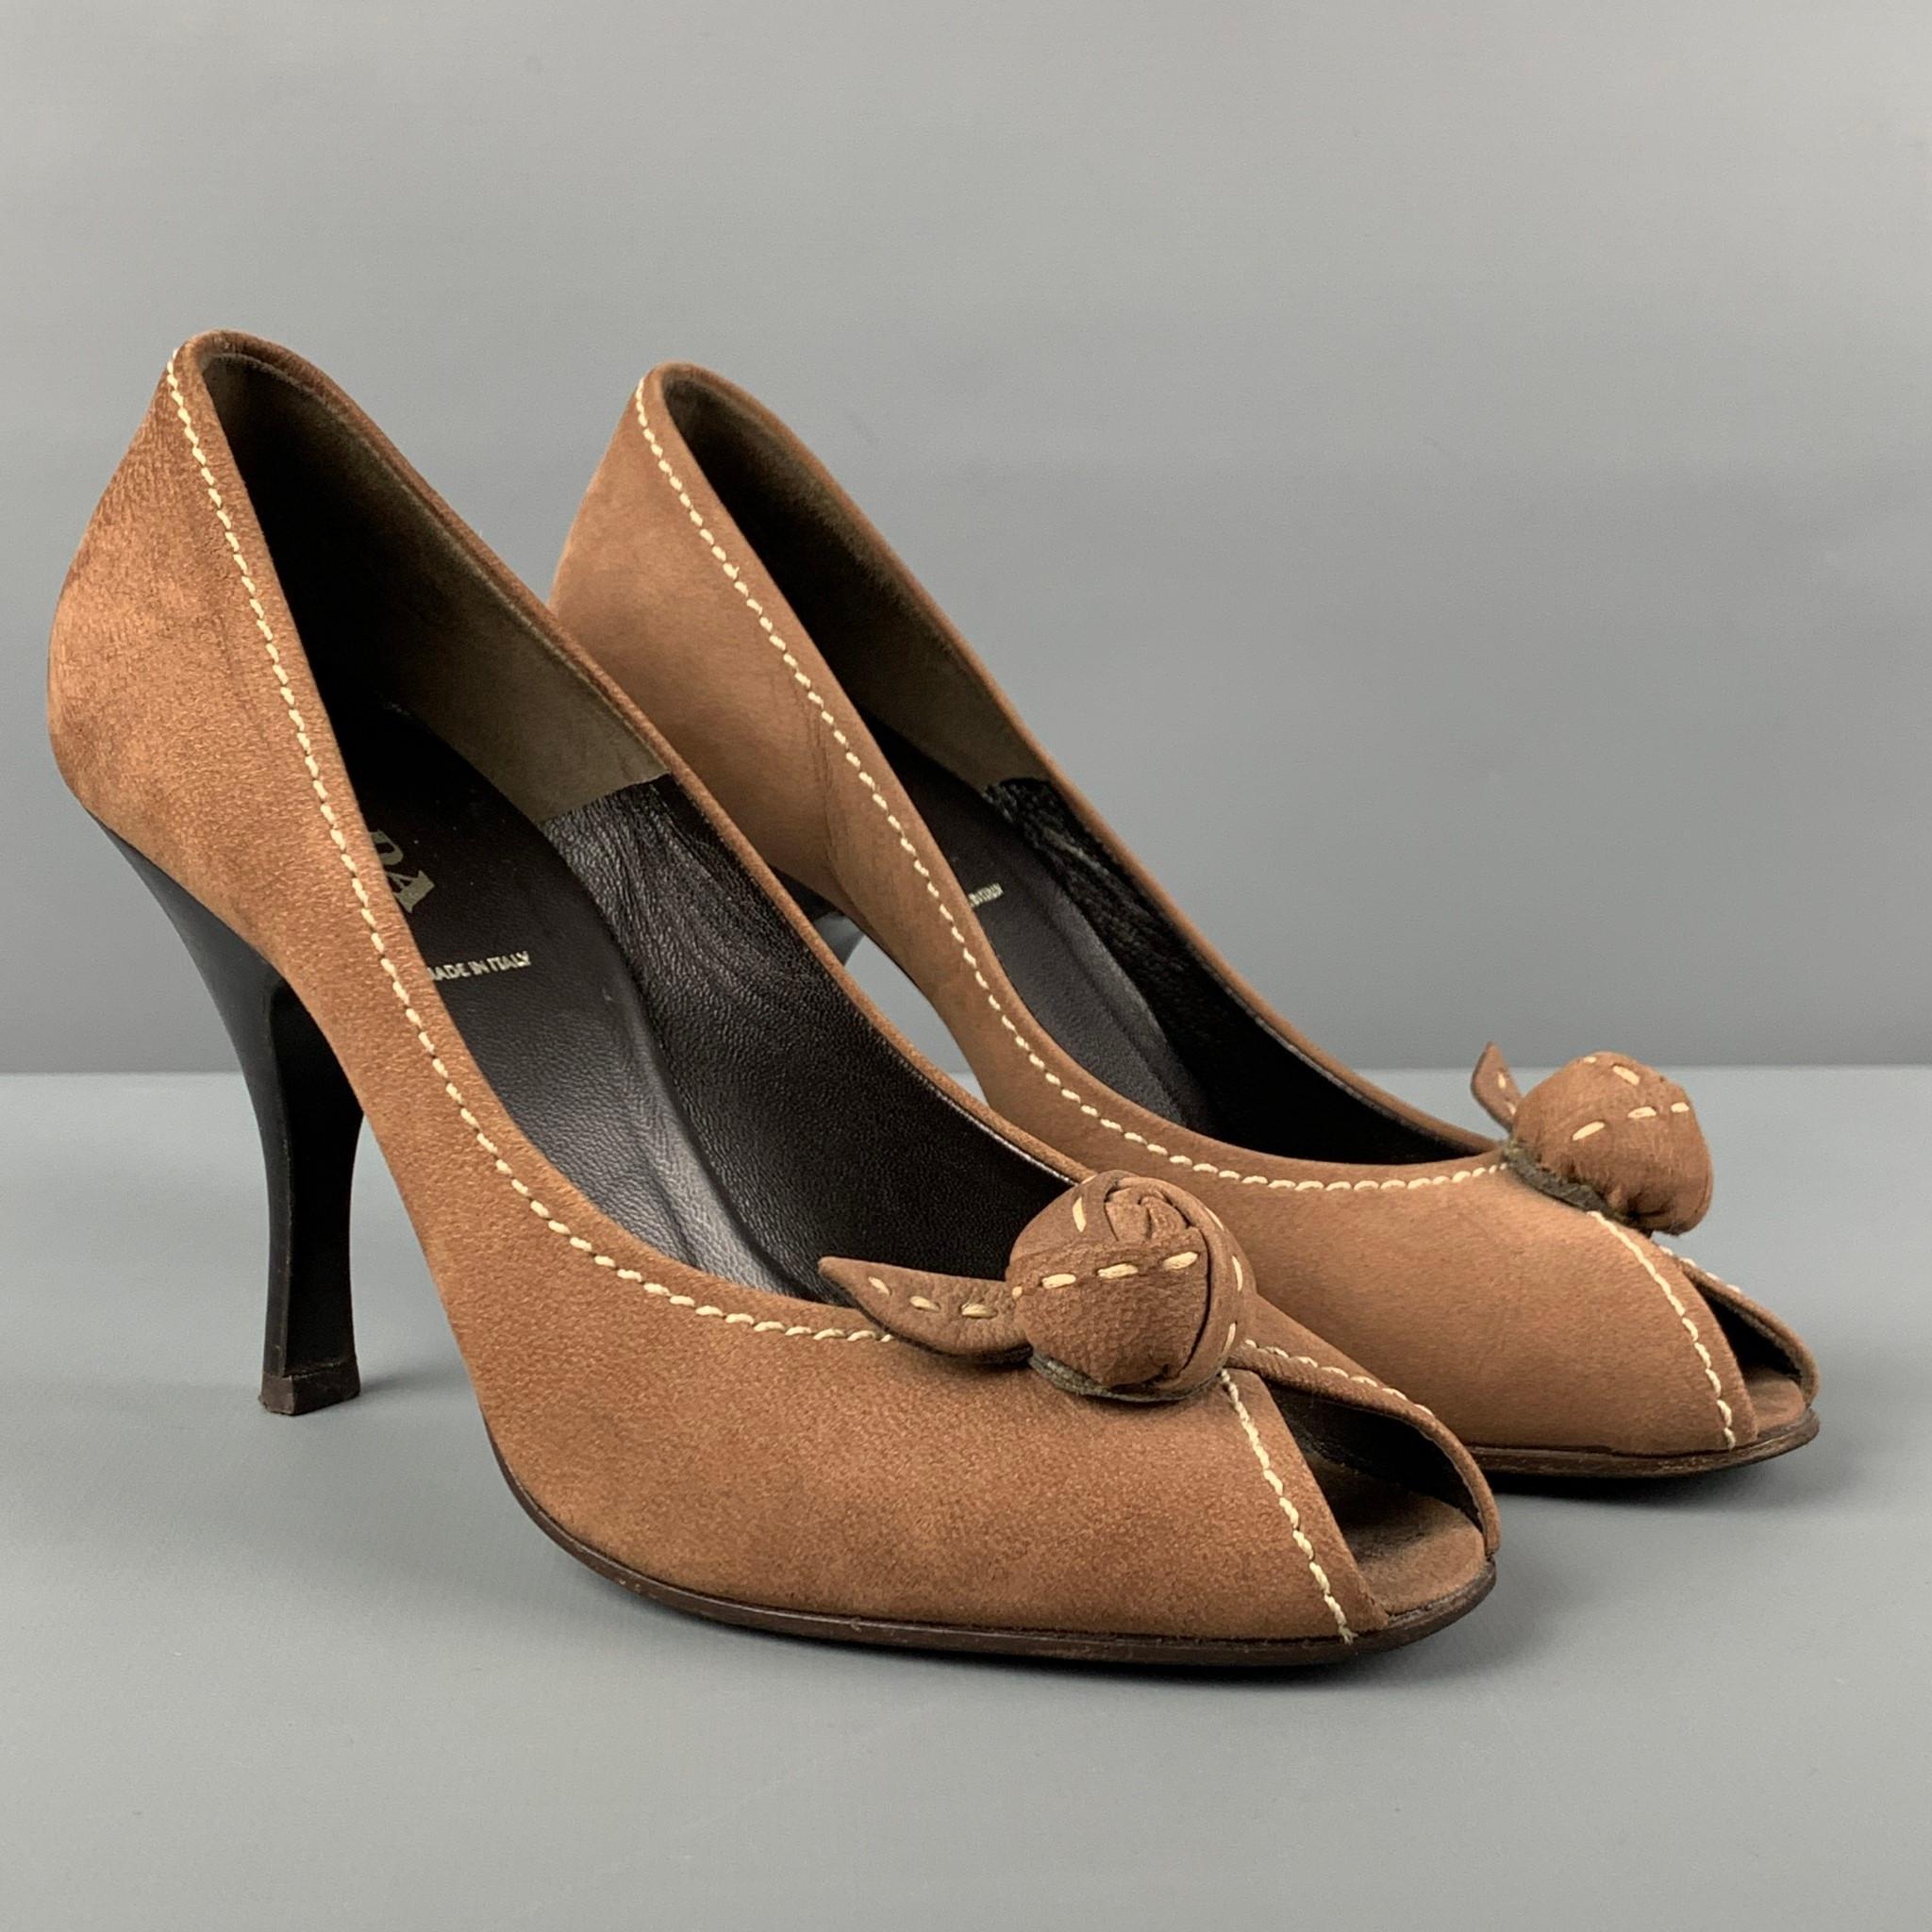 PRADA pumps comes in a brown suede featuring a knot detail, top stitching, open toe, and a stiletto heel. Made in Italy. 

Very Good Pre-Owned Condition.
Marked: 36.5

Measurements:

Heel: 3.75 in. 